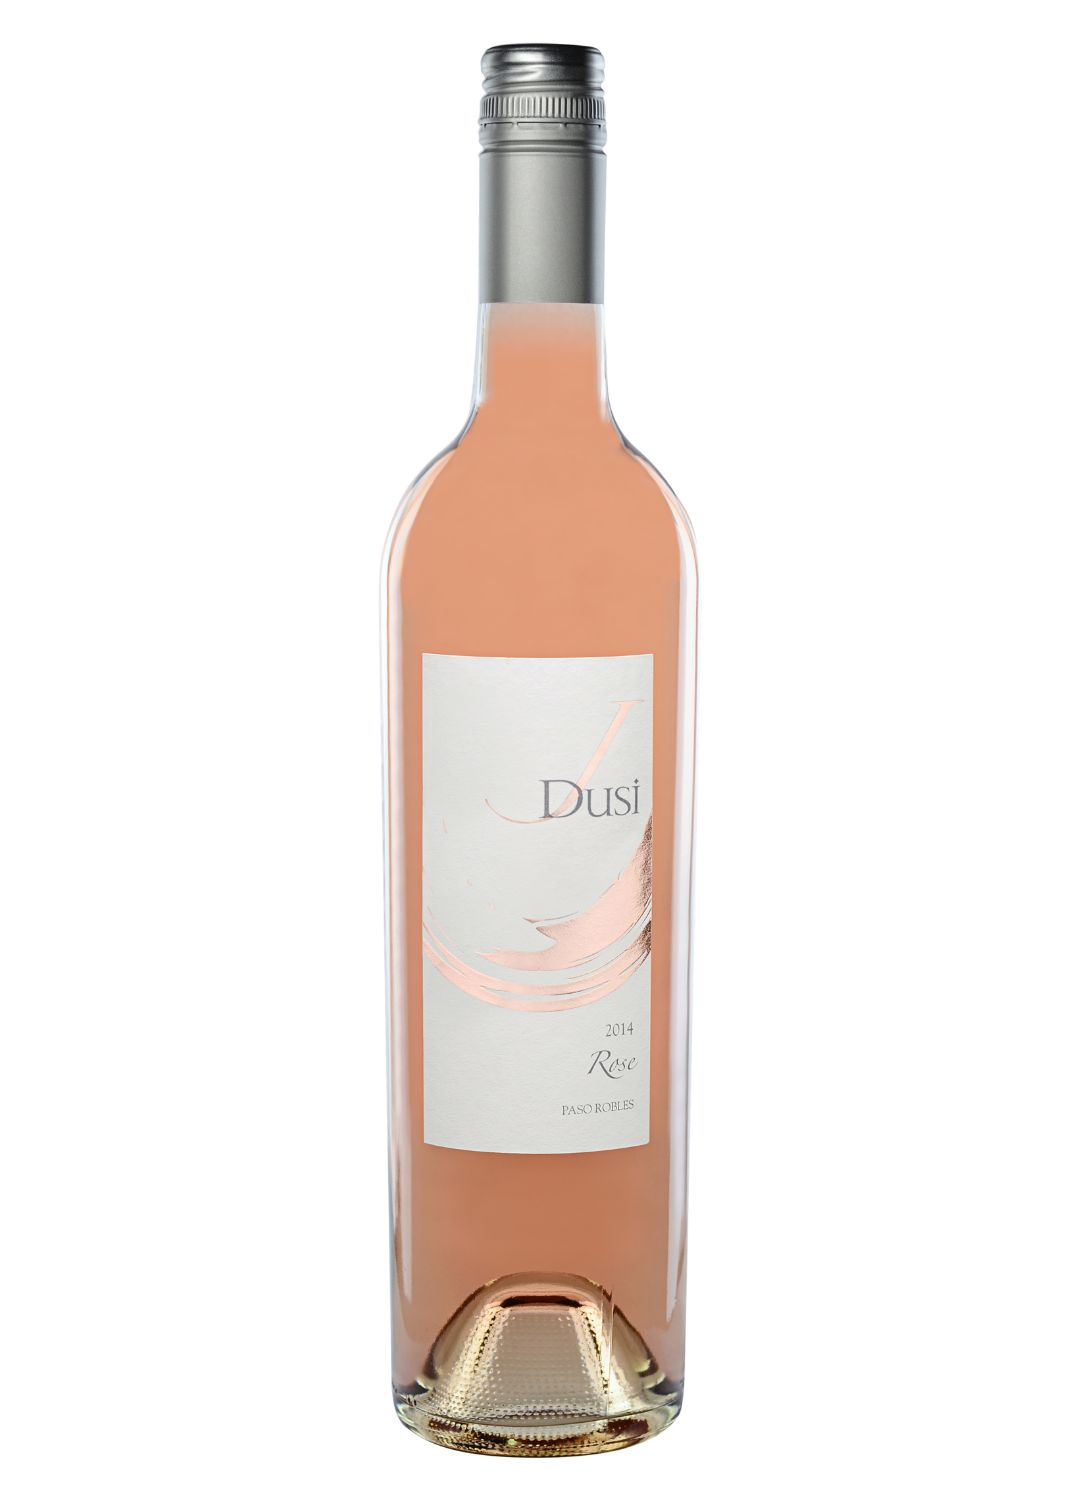 Bottle of Rose from J Dusi Wines